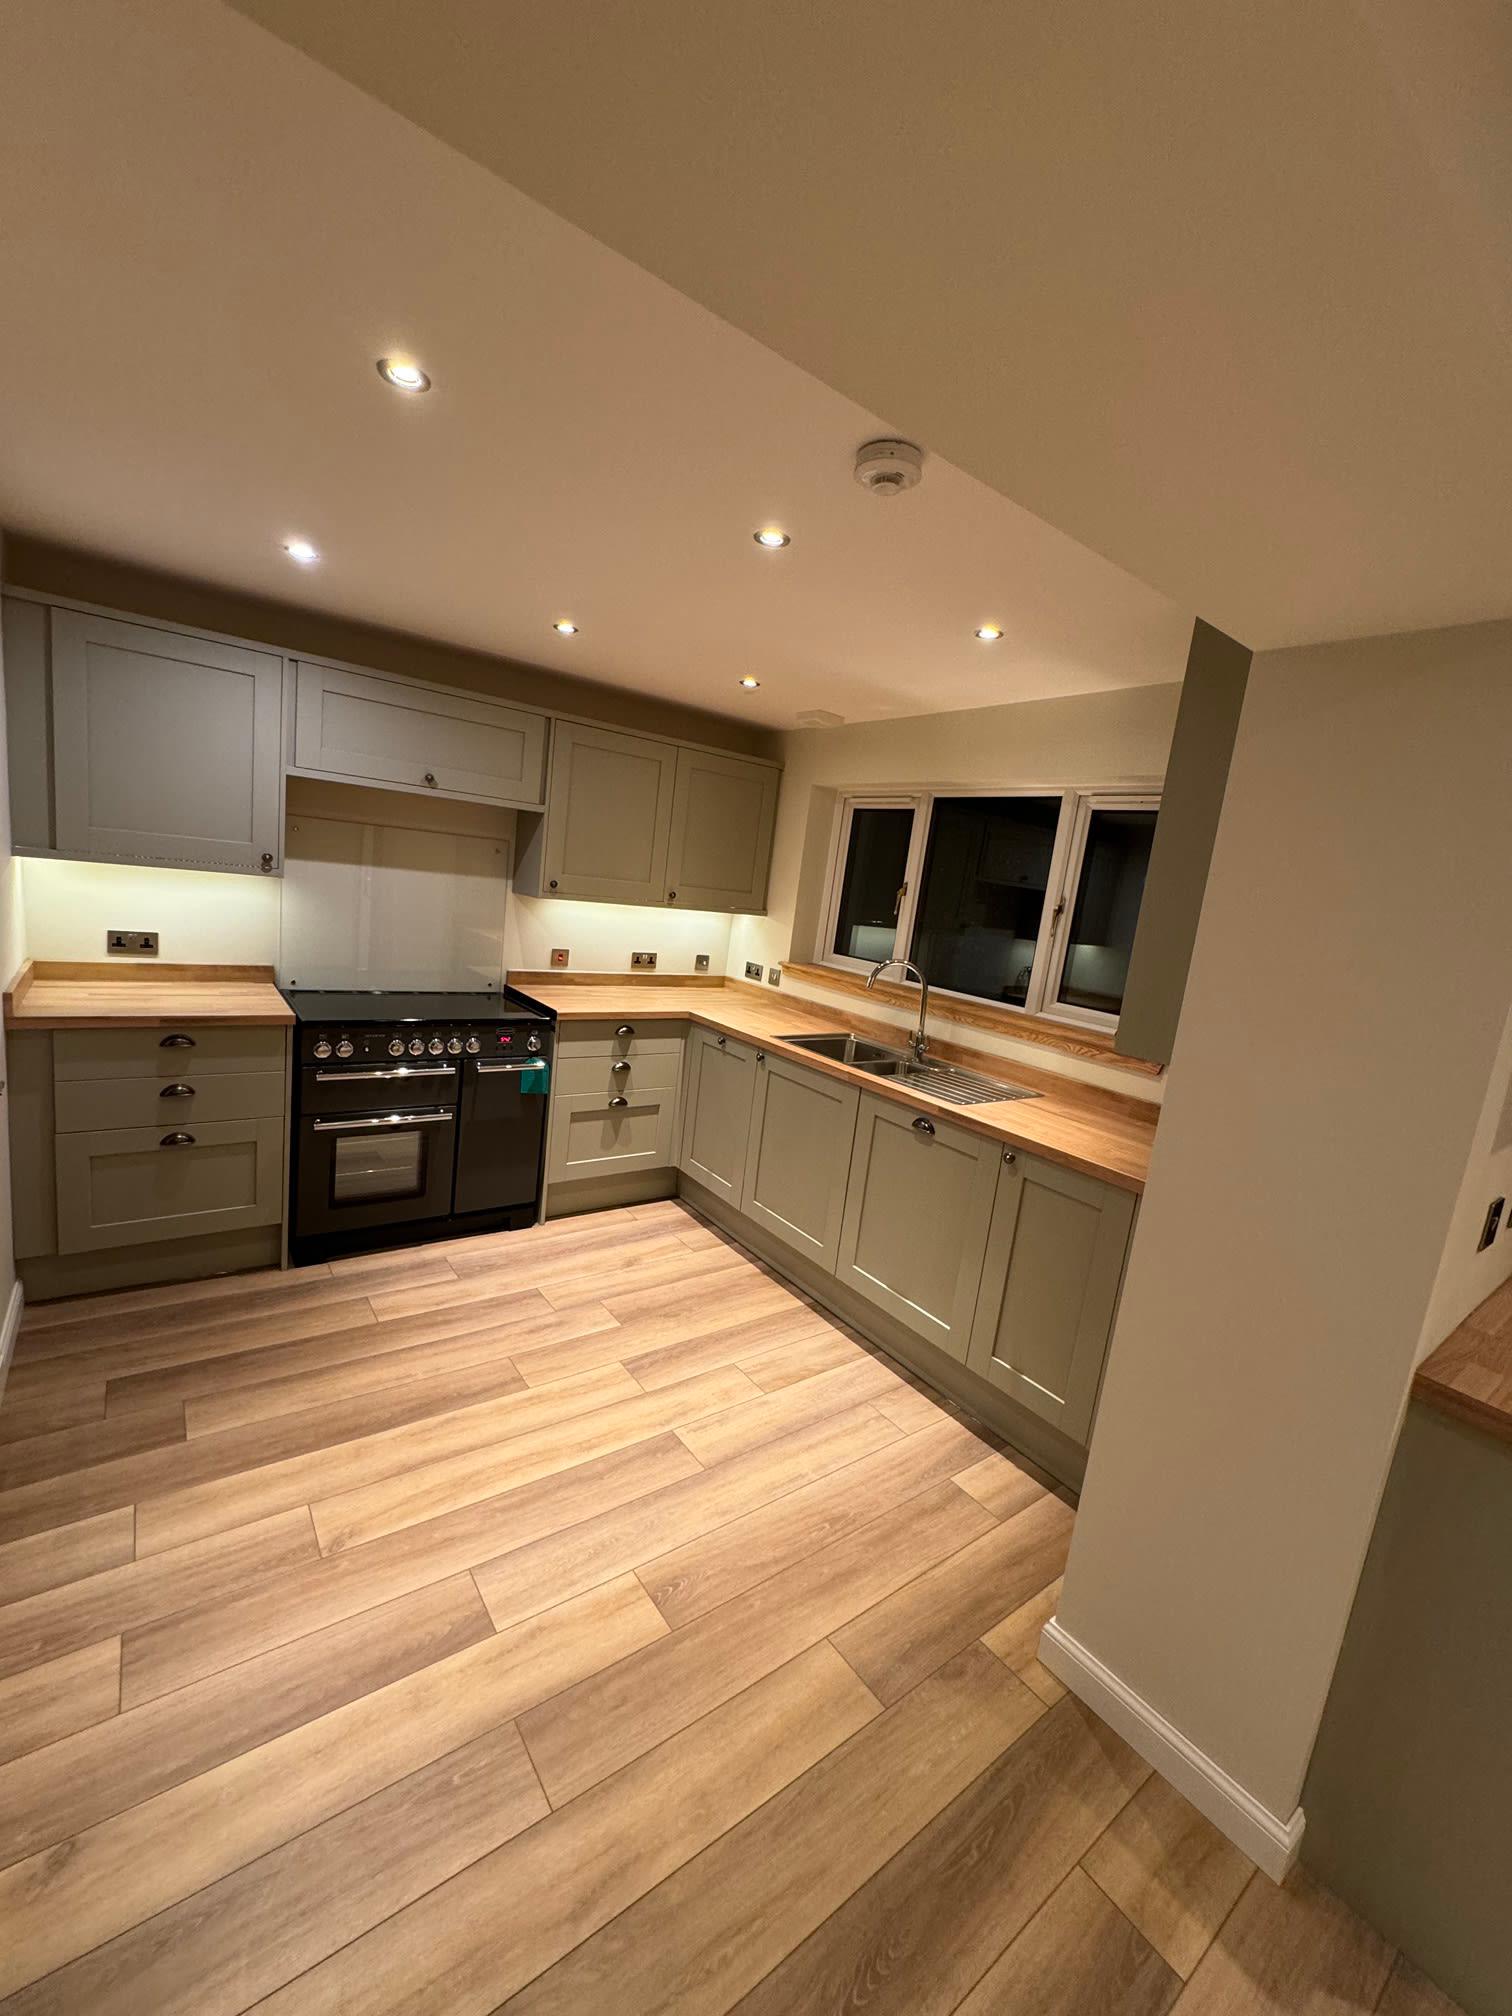 Images Domestic Joinery & Maintenance Services